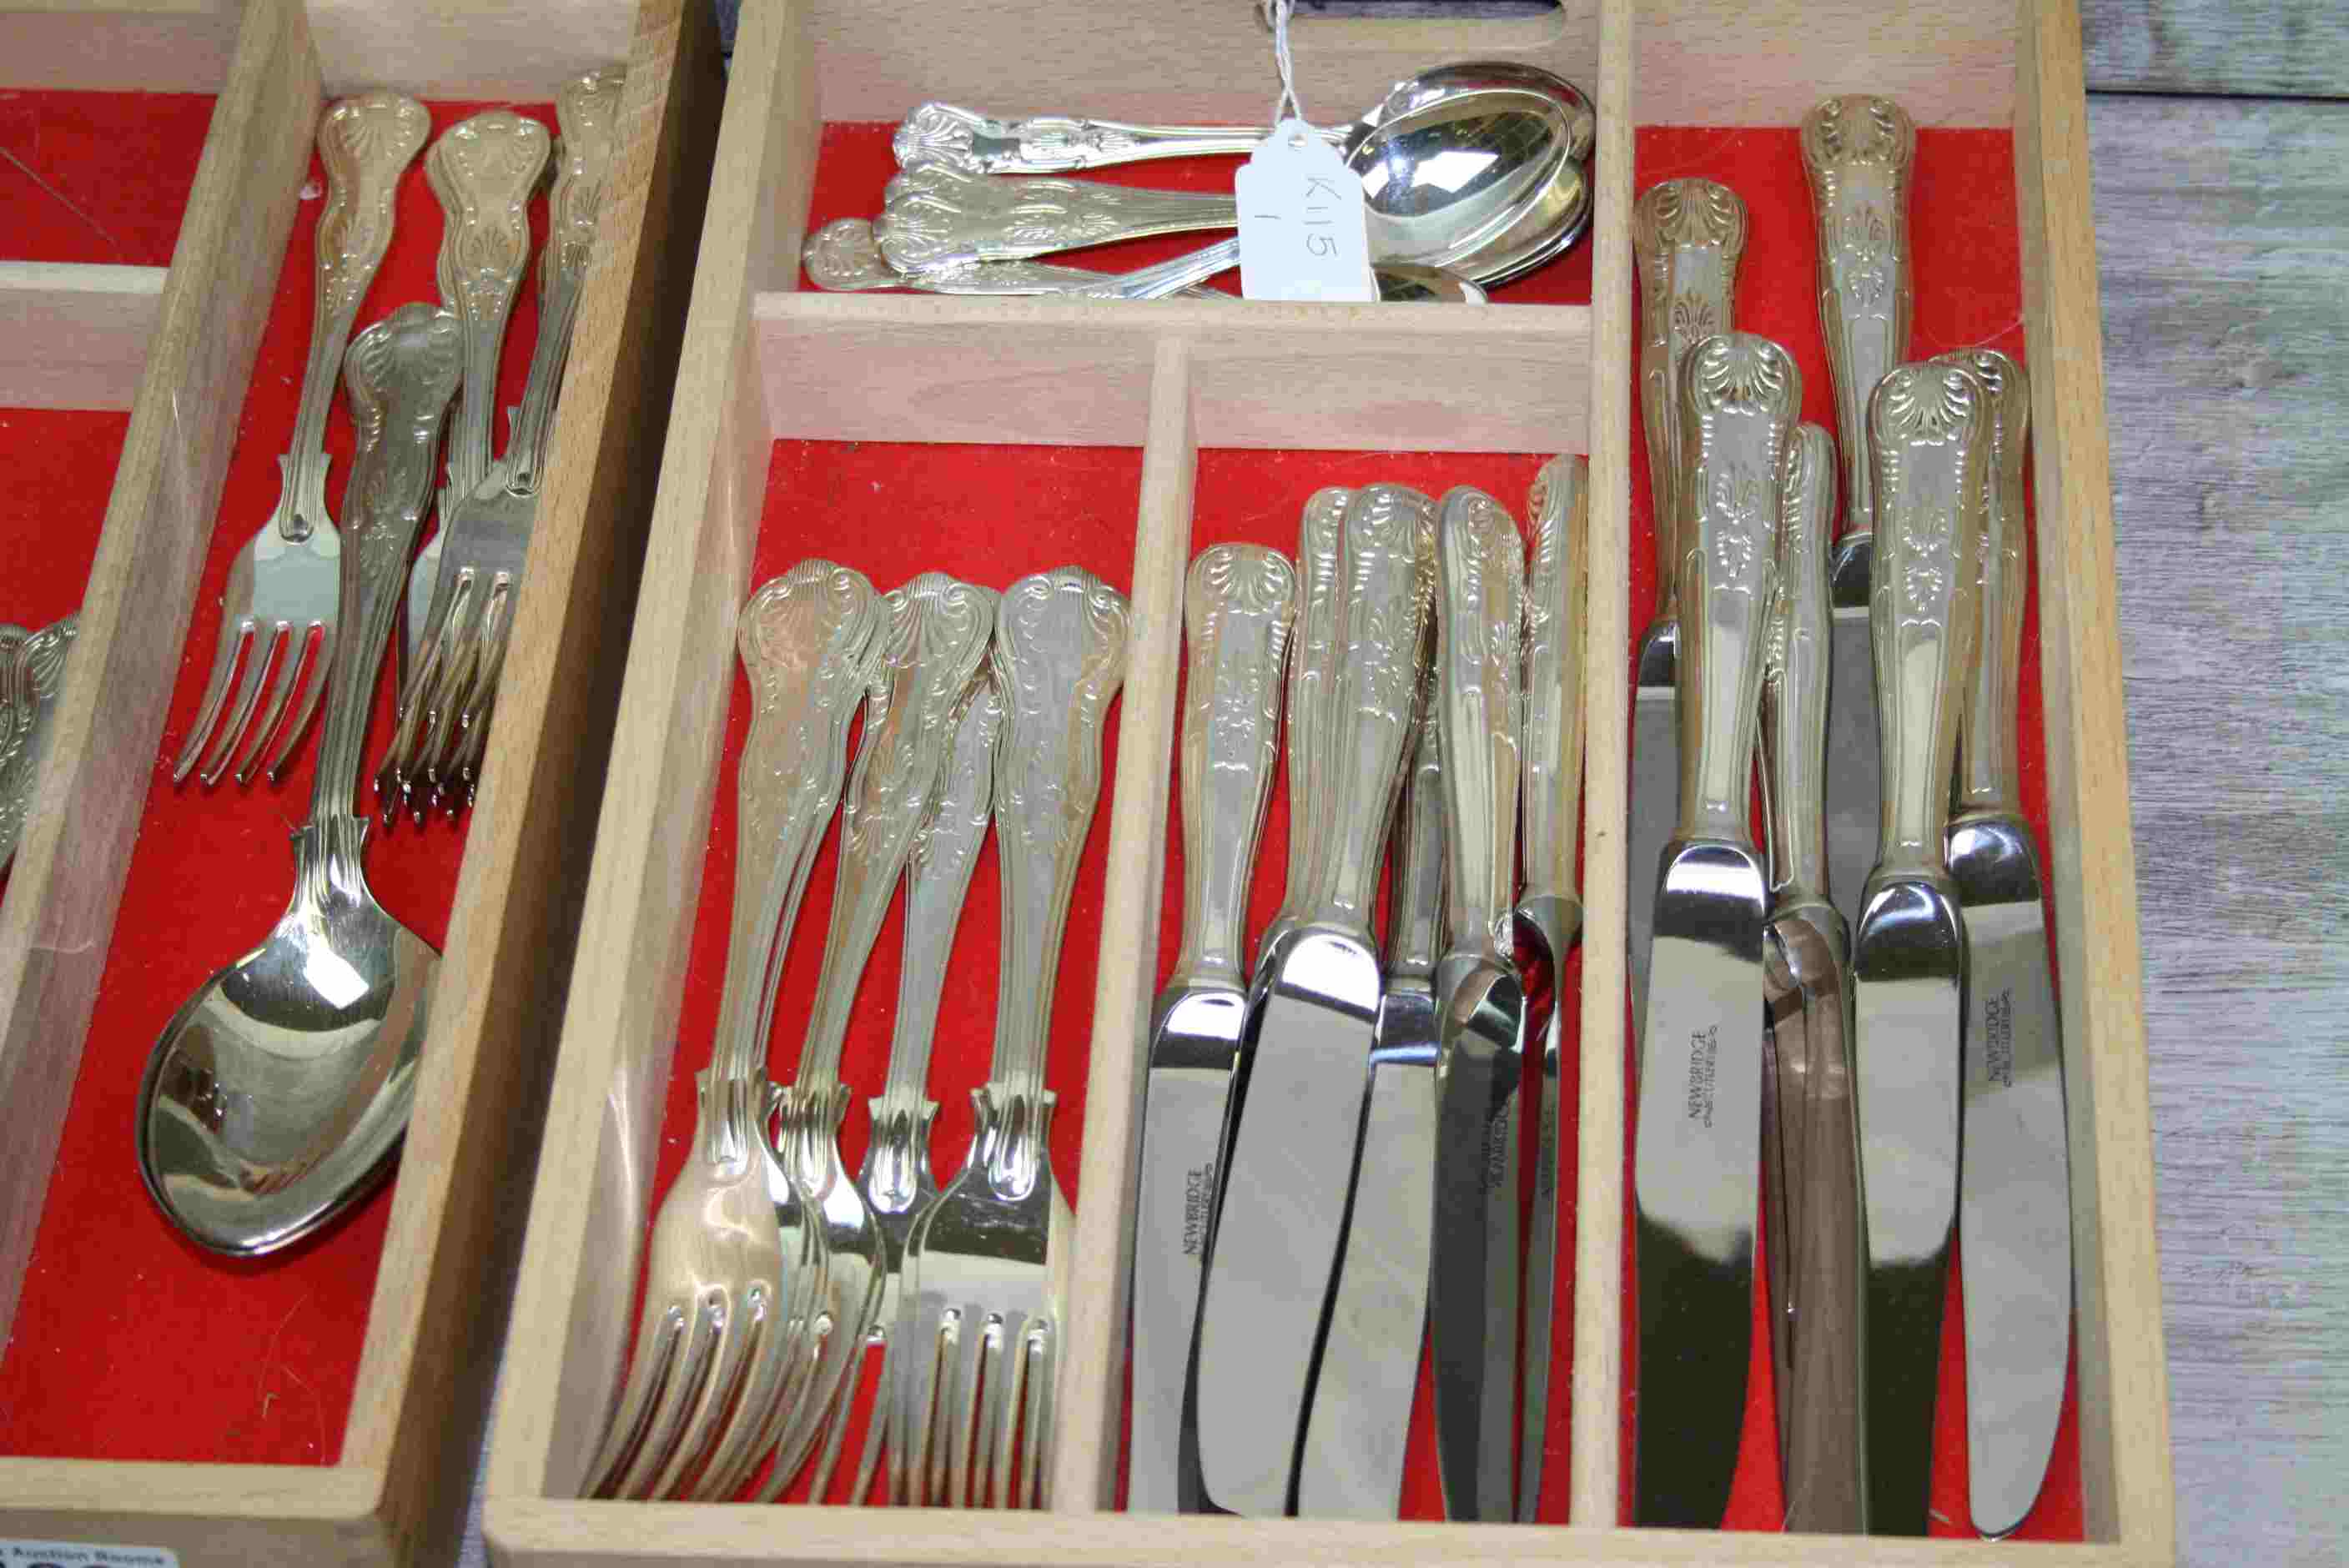 Set of Newbridge A1 Silver Plated Kings Pattern Cutlery, Six Place Setting, (44 pieces in total) - Image 4 of 4